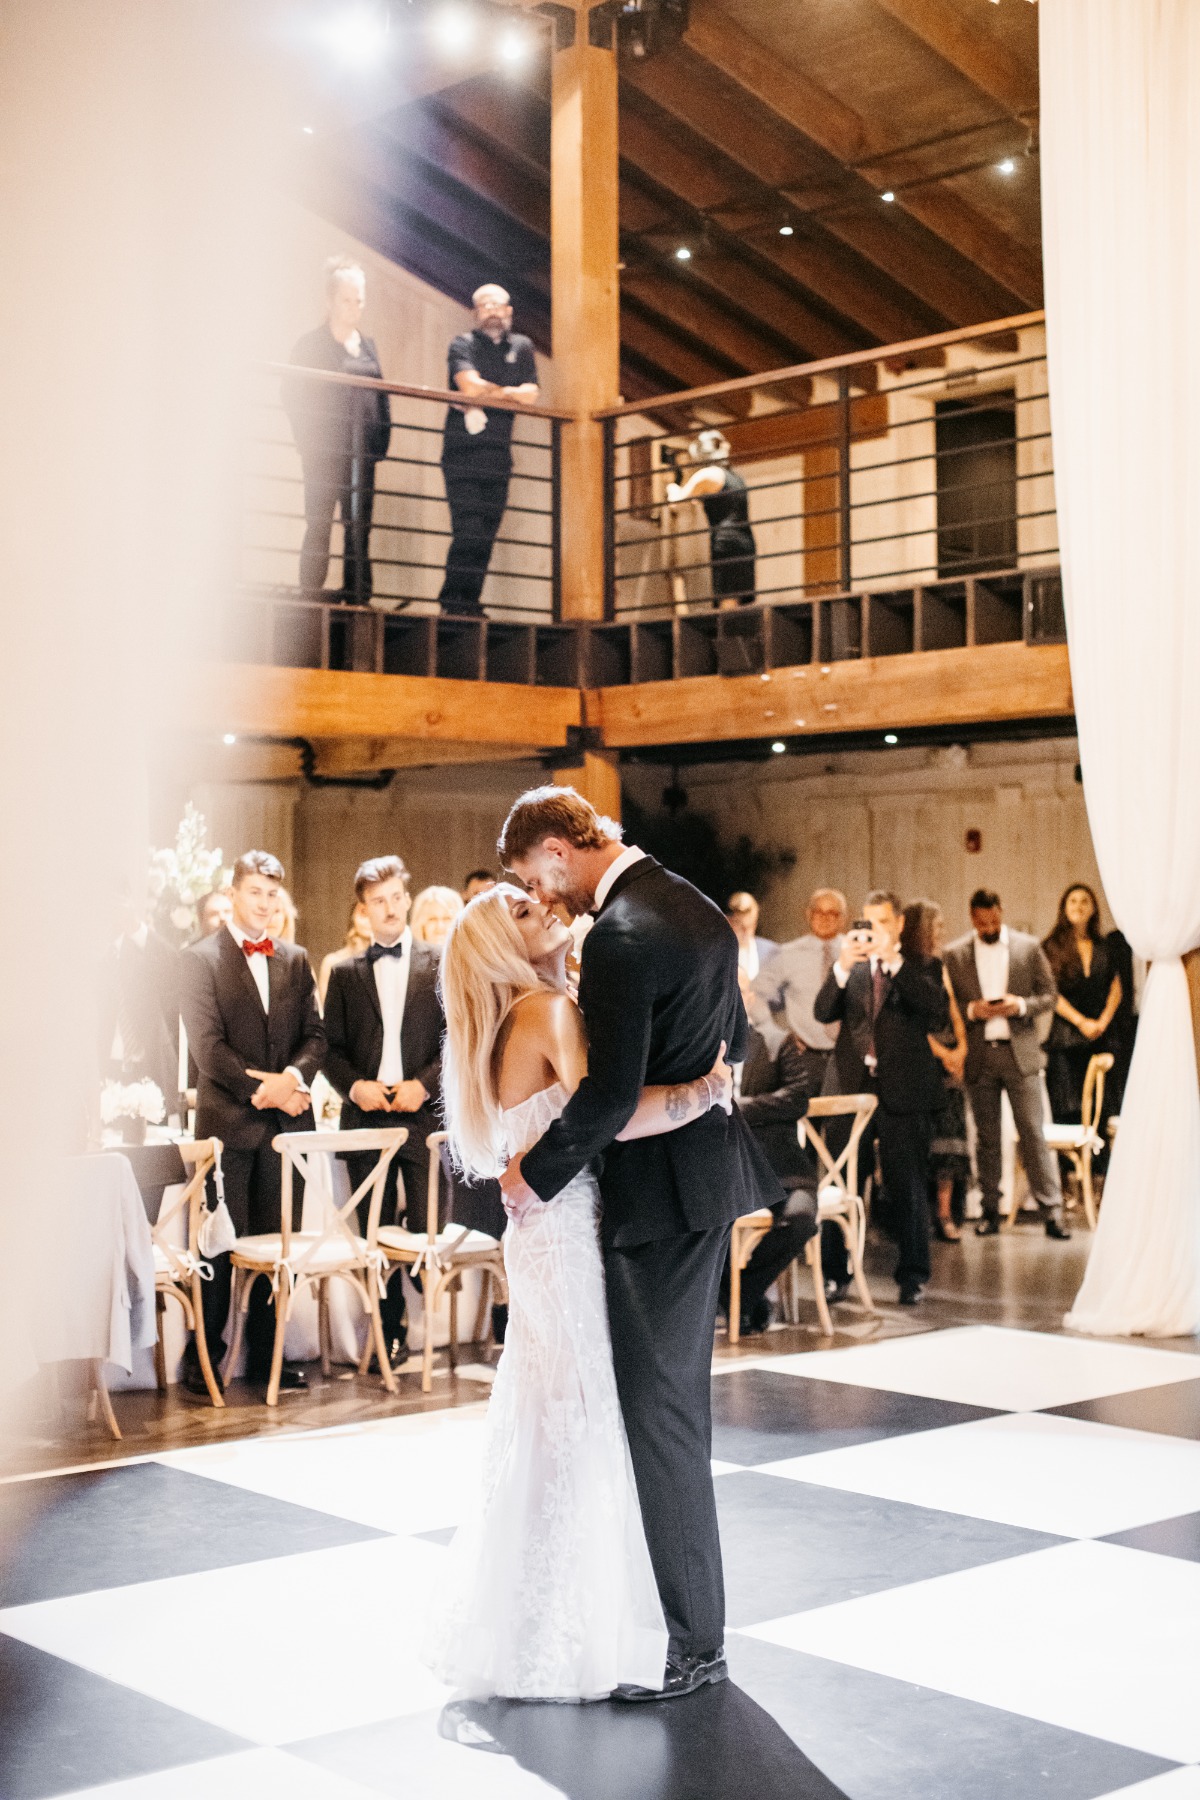 Austin Watson and wife first dance on checkerboard dance floor